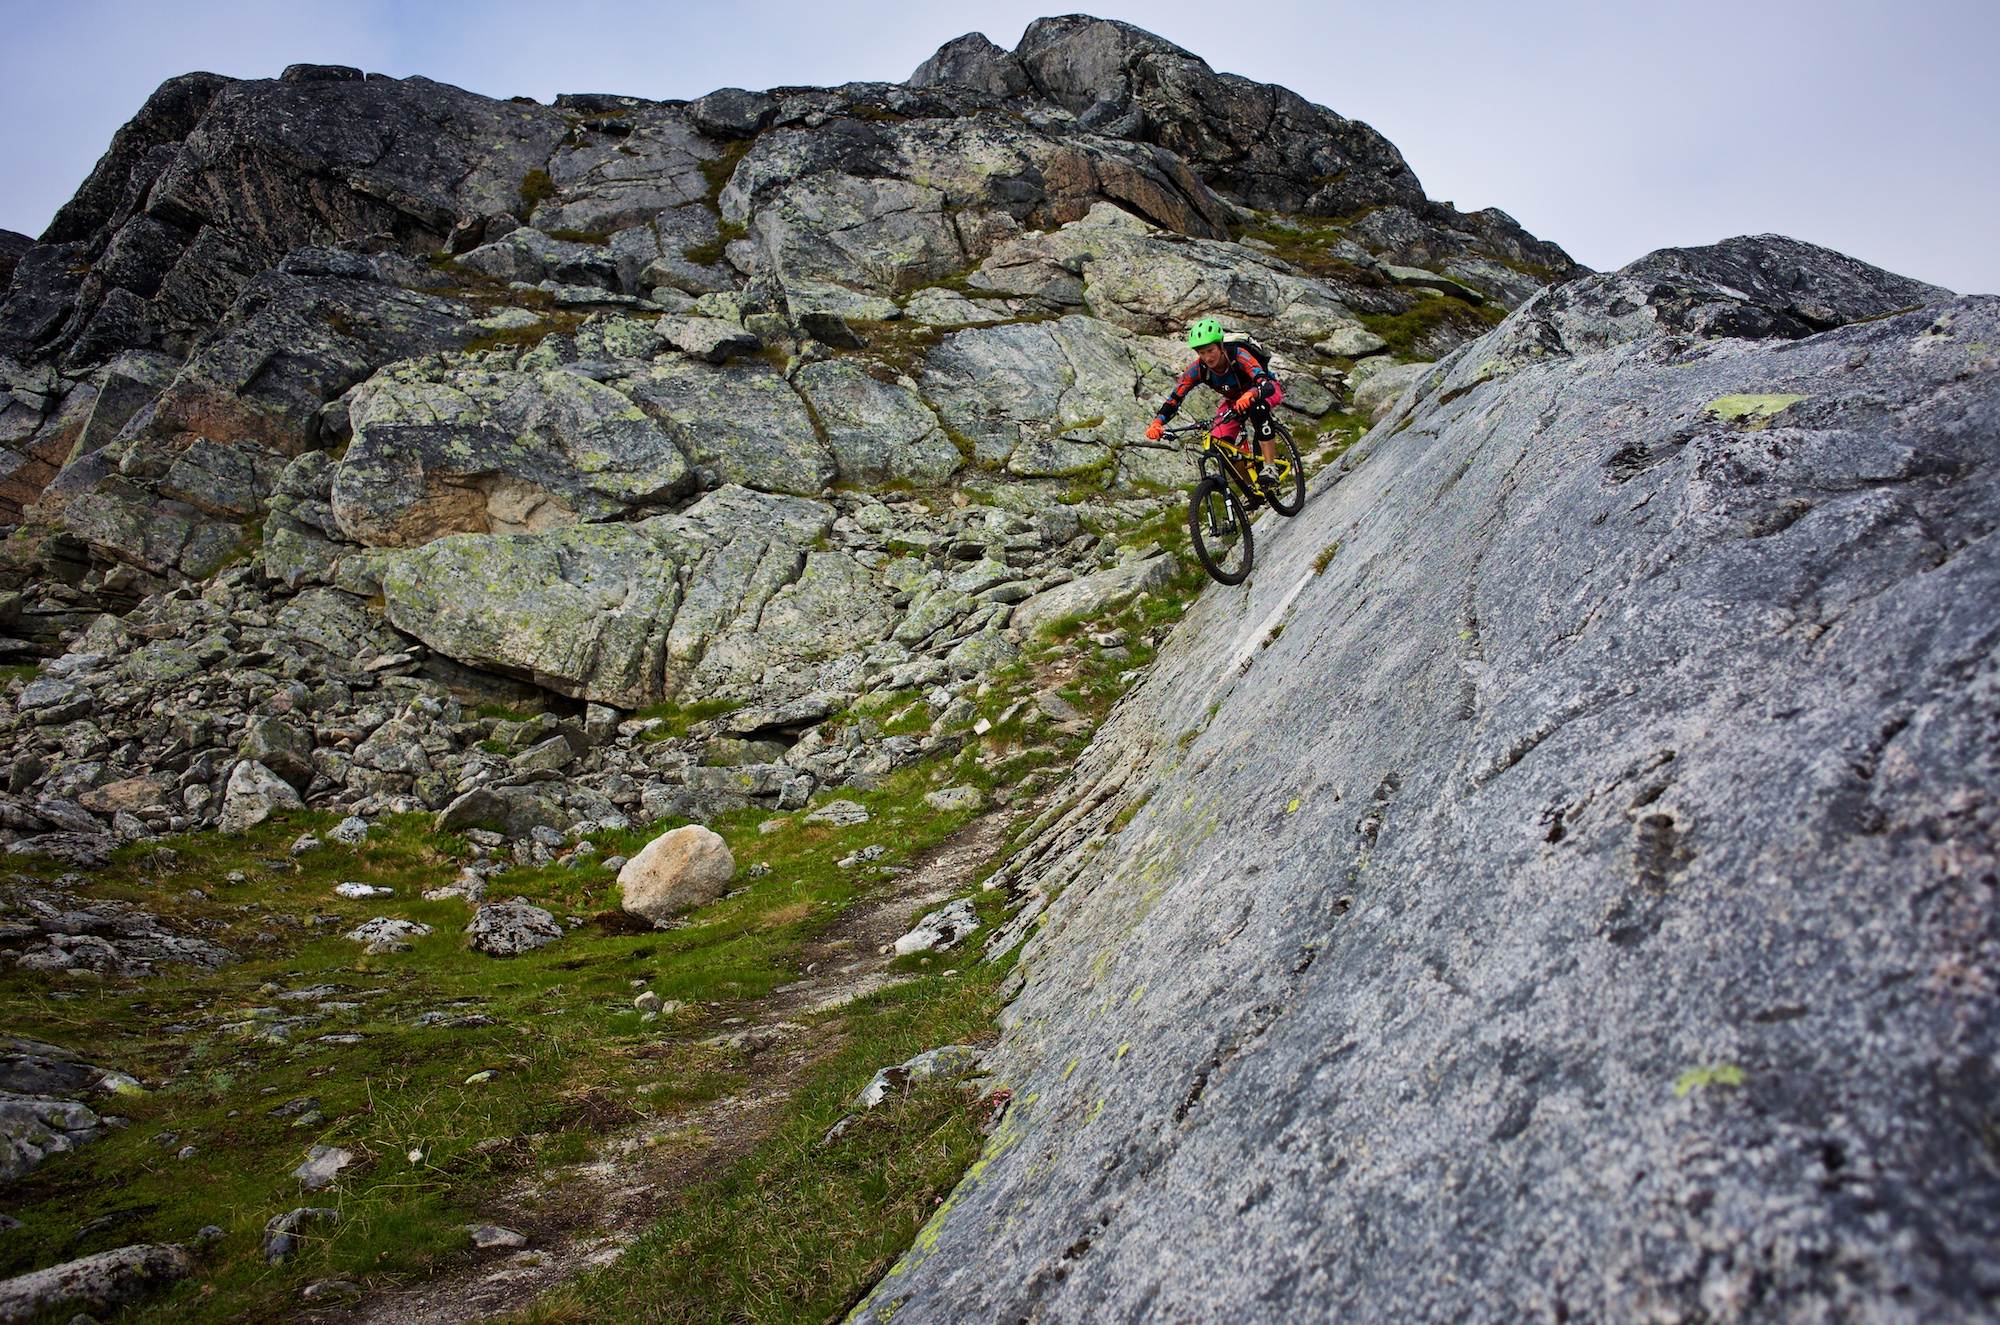 A few cool features such as this super grippy granite slab are fun to navigate